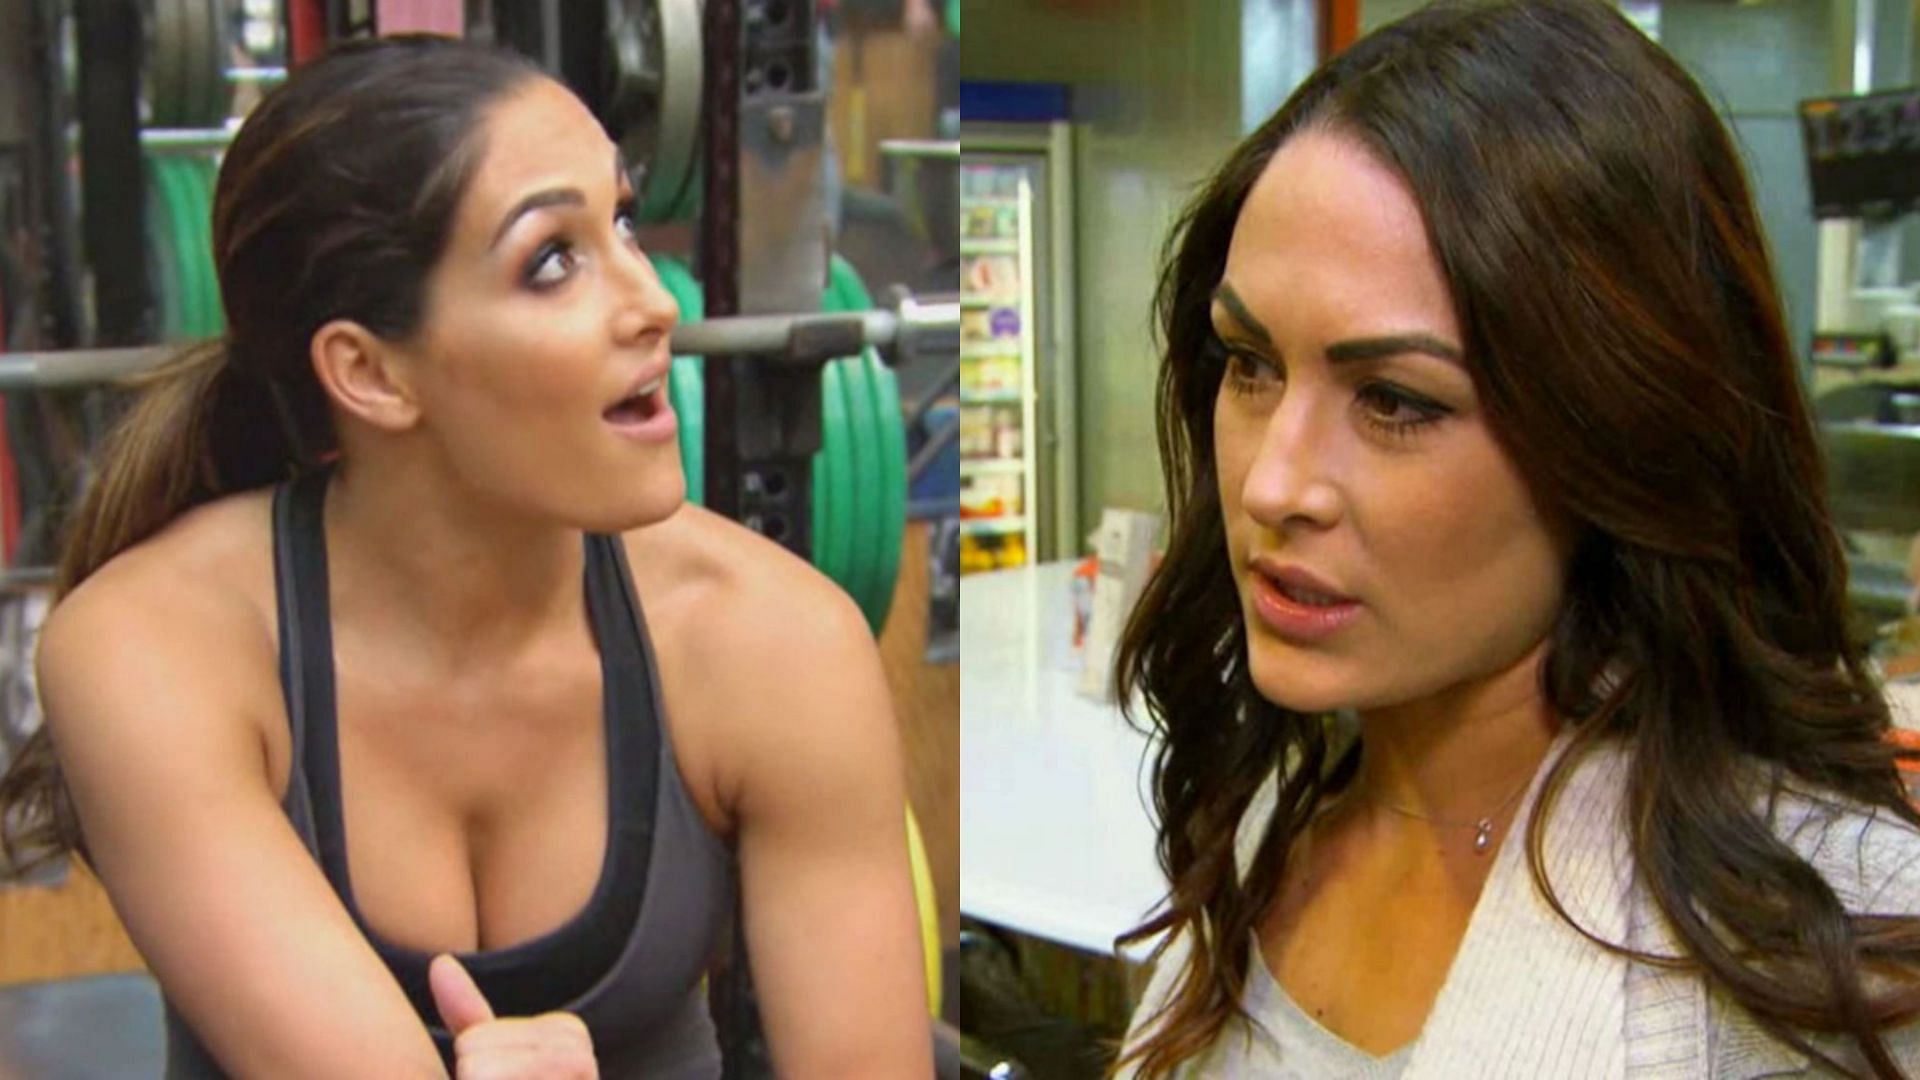 WWE Hall of Famers The Bella Twins